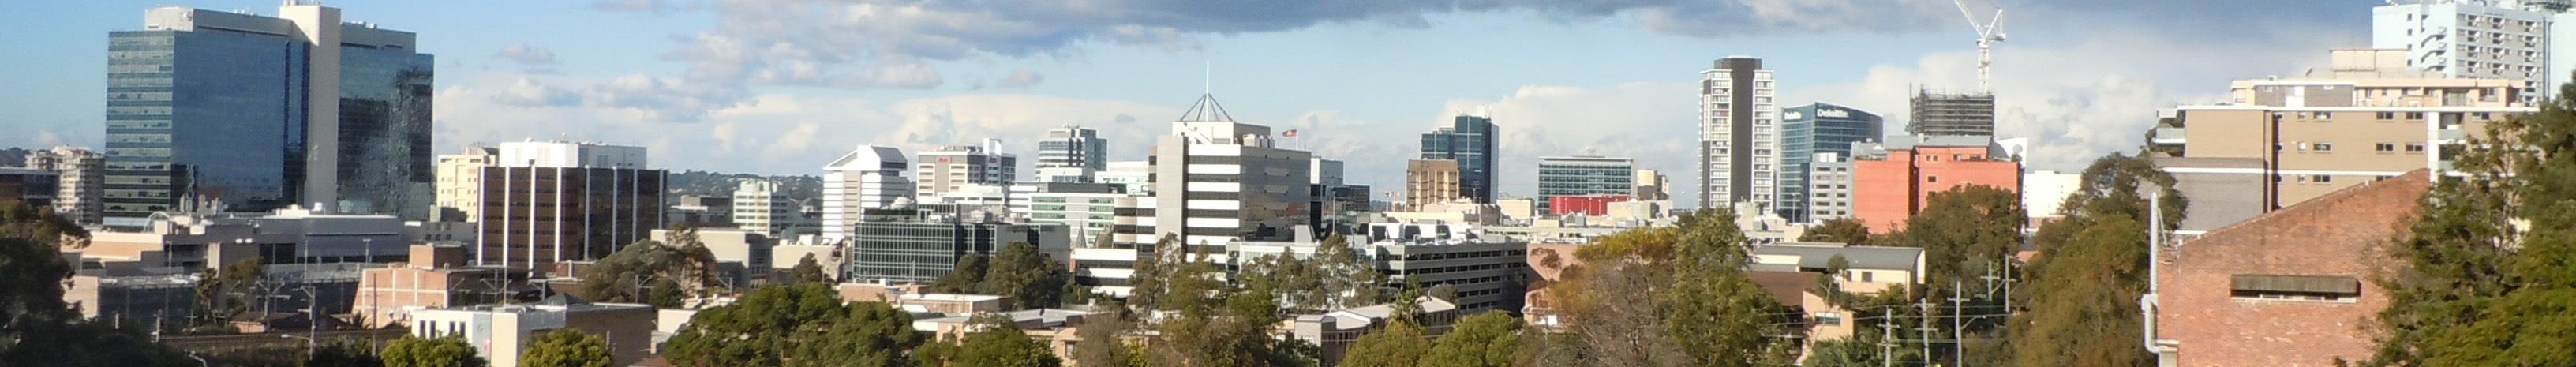 Banner image for Parramatta on GigsGuide